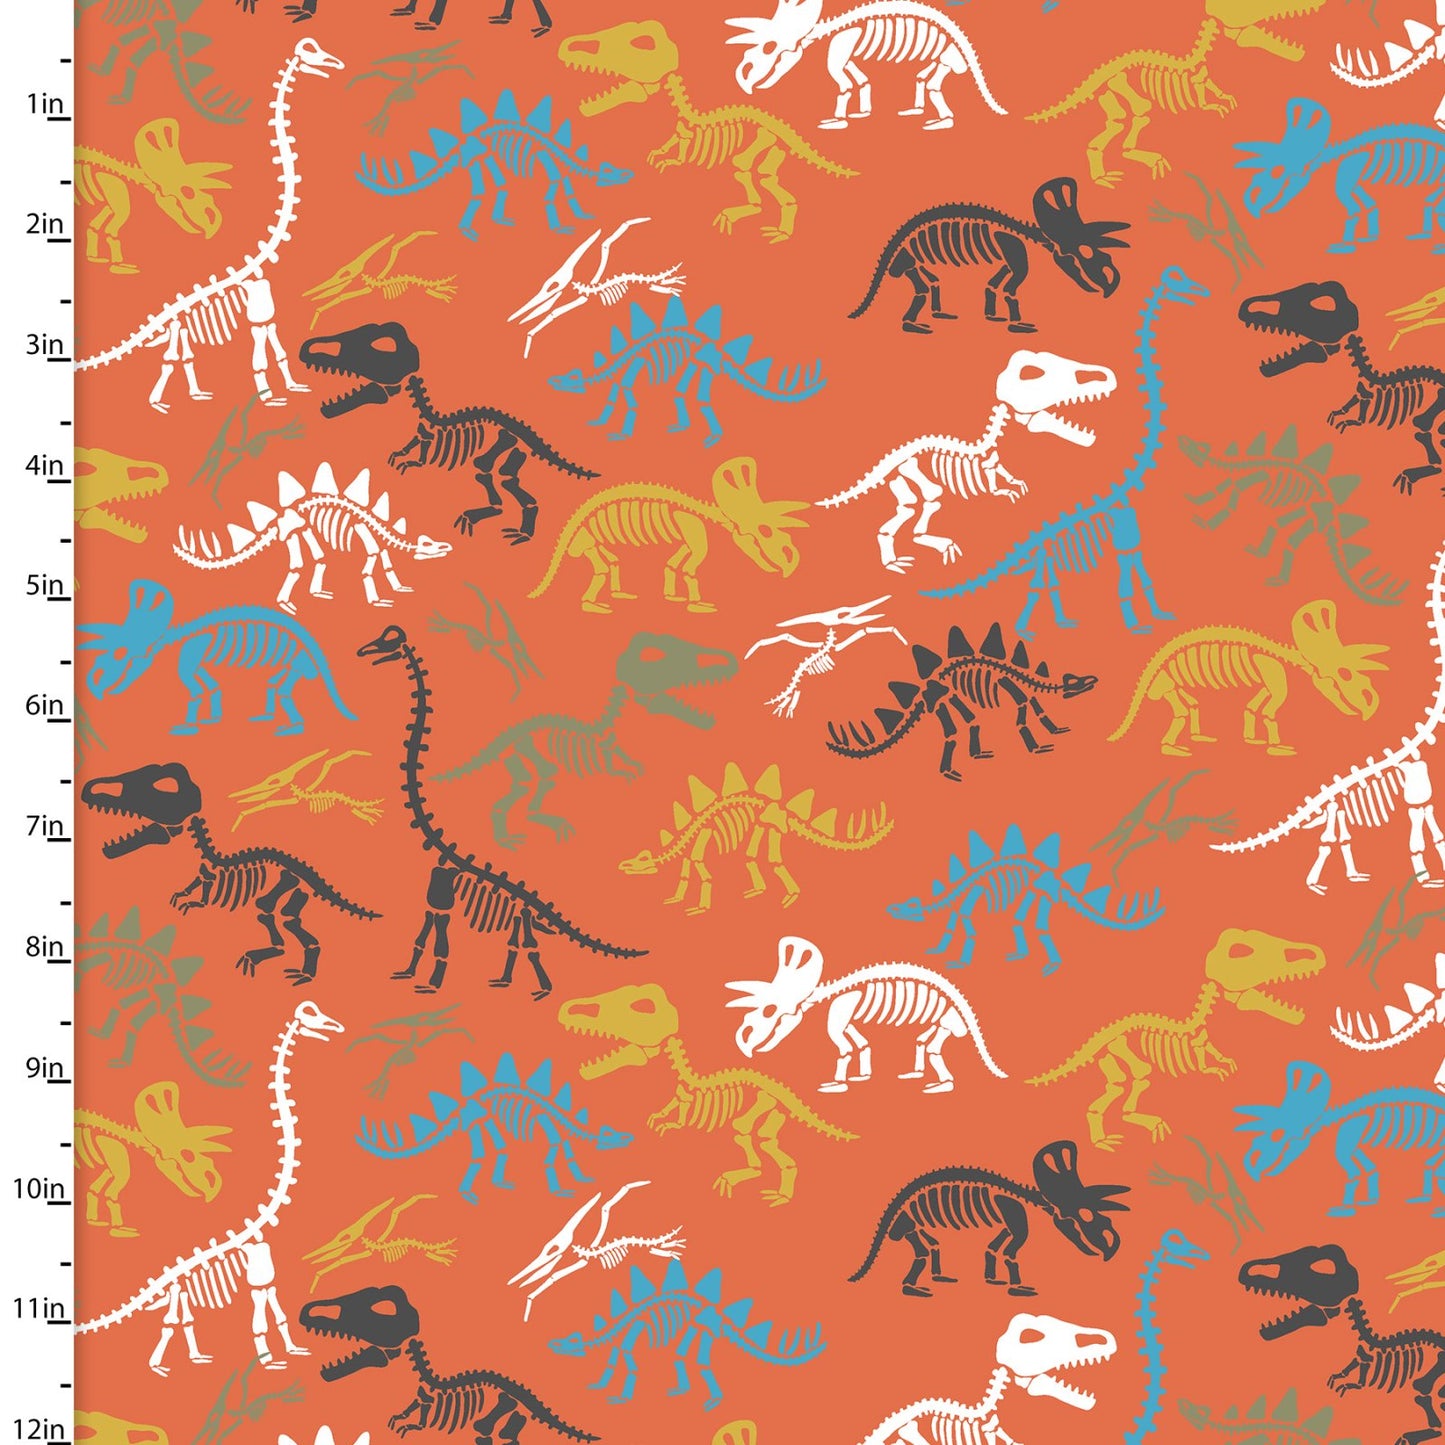 Flannel - 3 Wishes - Totally Roarsome Flannel by Josh Rey Collection  -  Skeleton Scatter Flannel  - Orange - Priced by the Half Metre